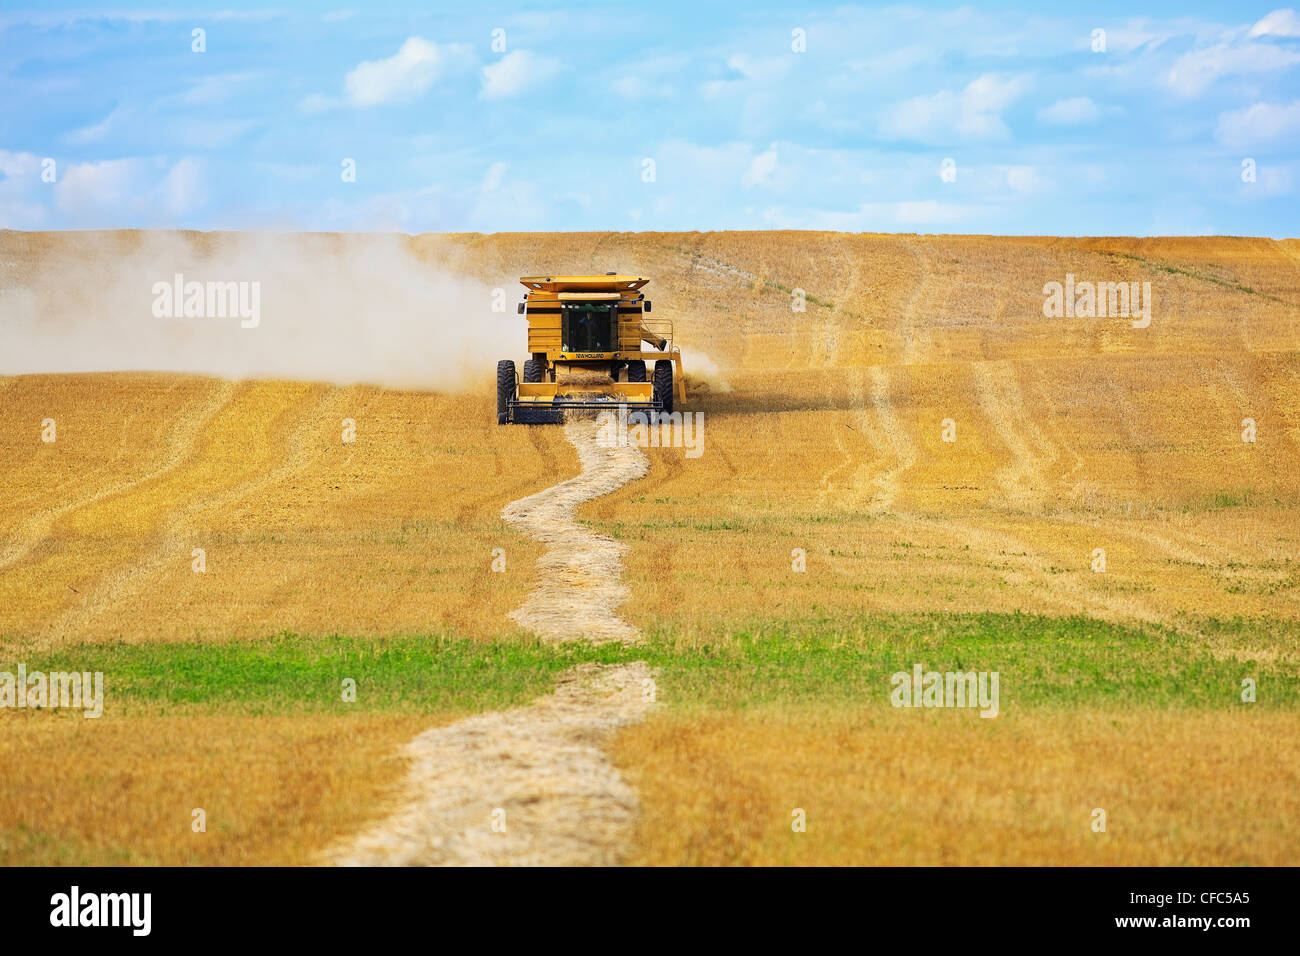 Combine harvester collecting a field of swathed wheat. Near Somerset, Manitoba, Canada. Stock Photo